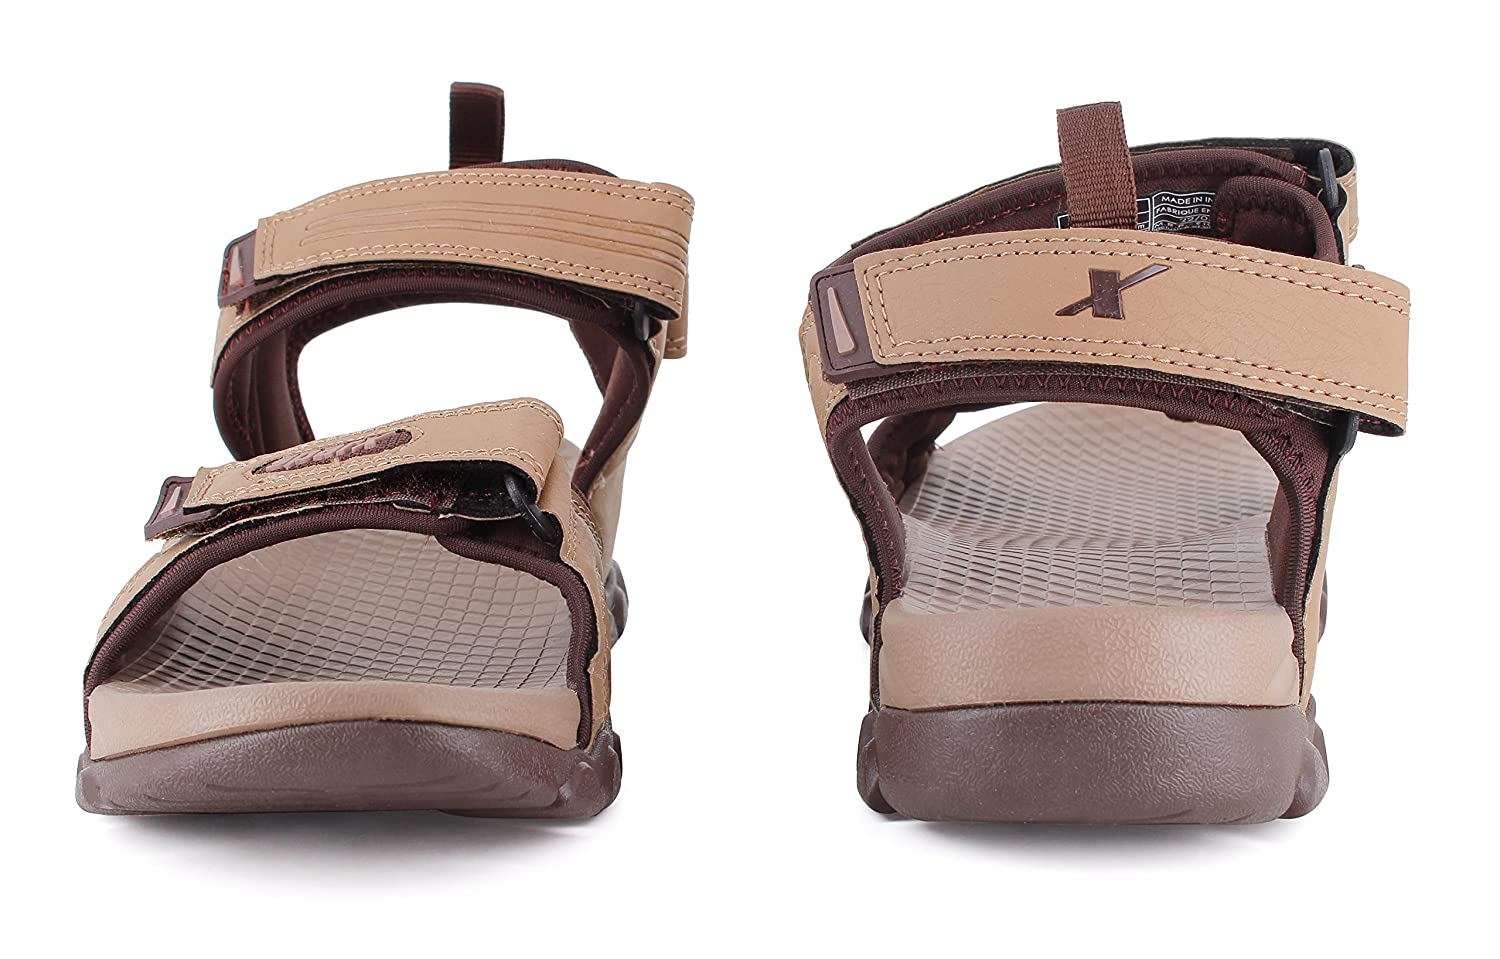 15 Popular Sparx Sandals For Men and Women In New Models